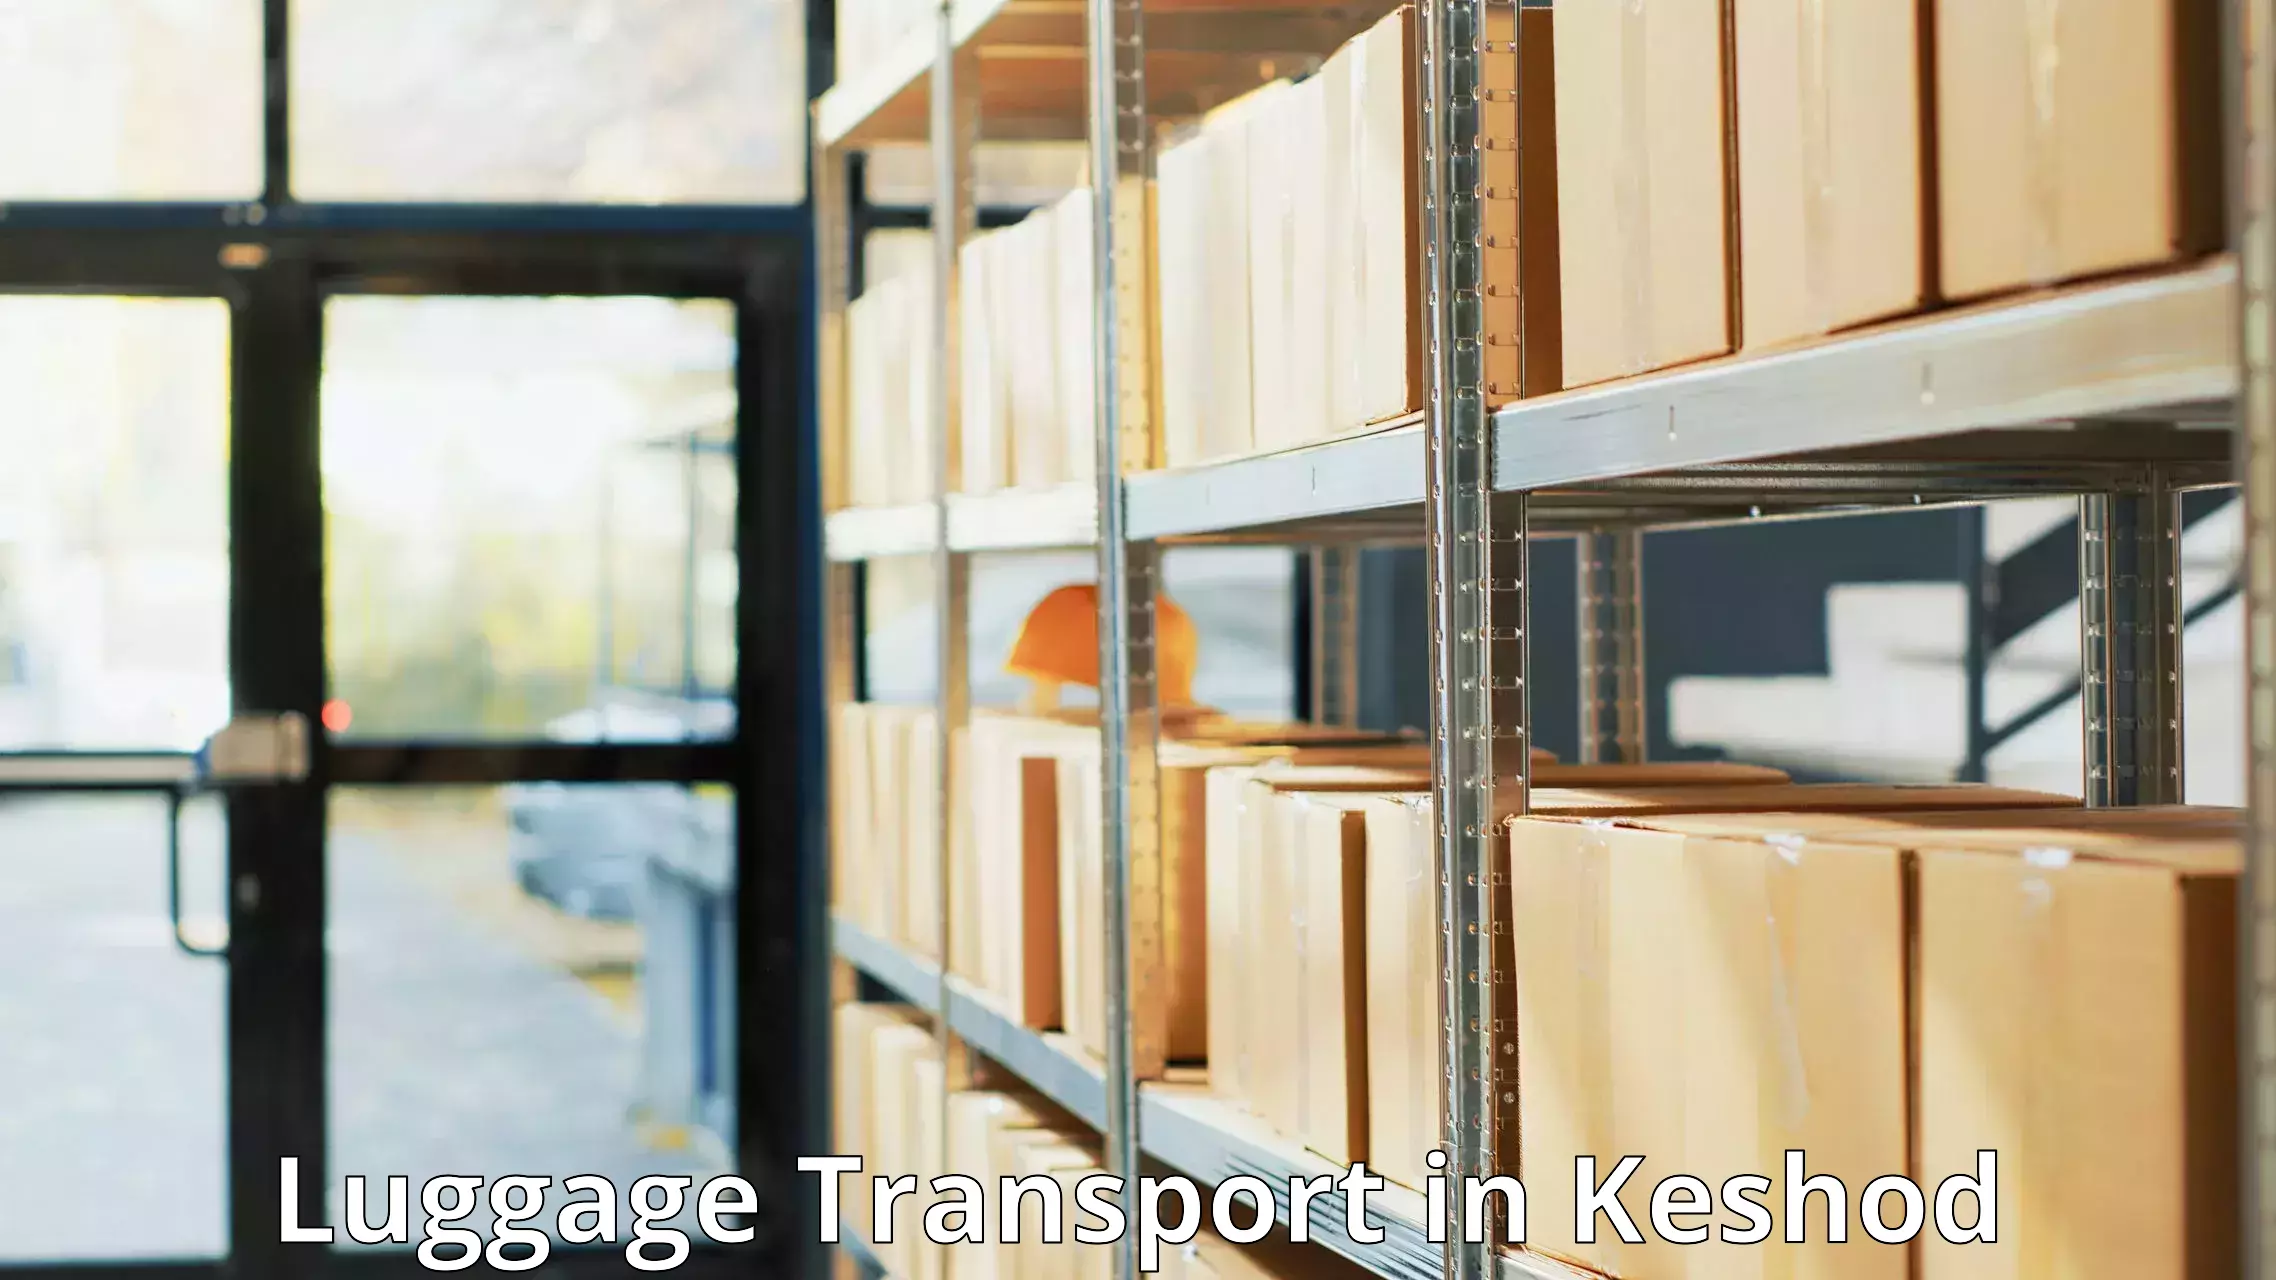 Luggage transport consultancy in Keshod